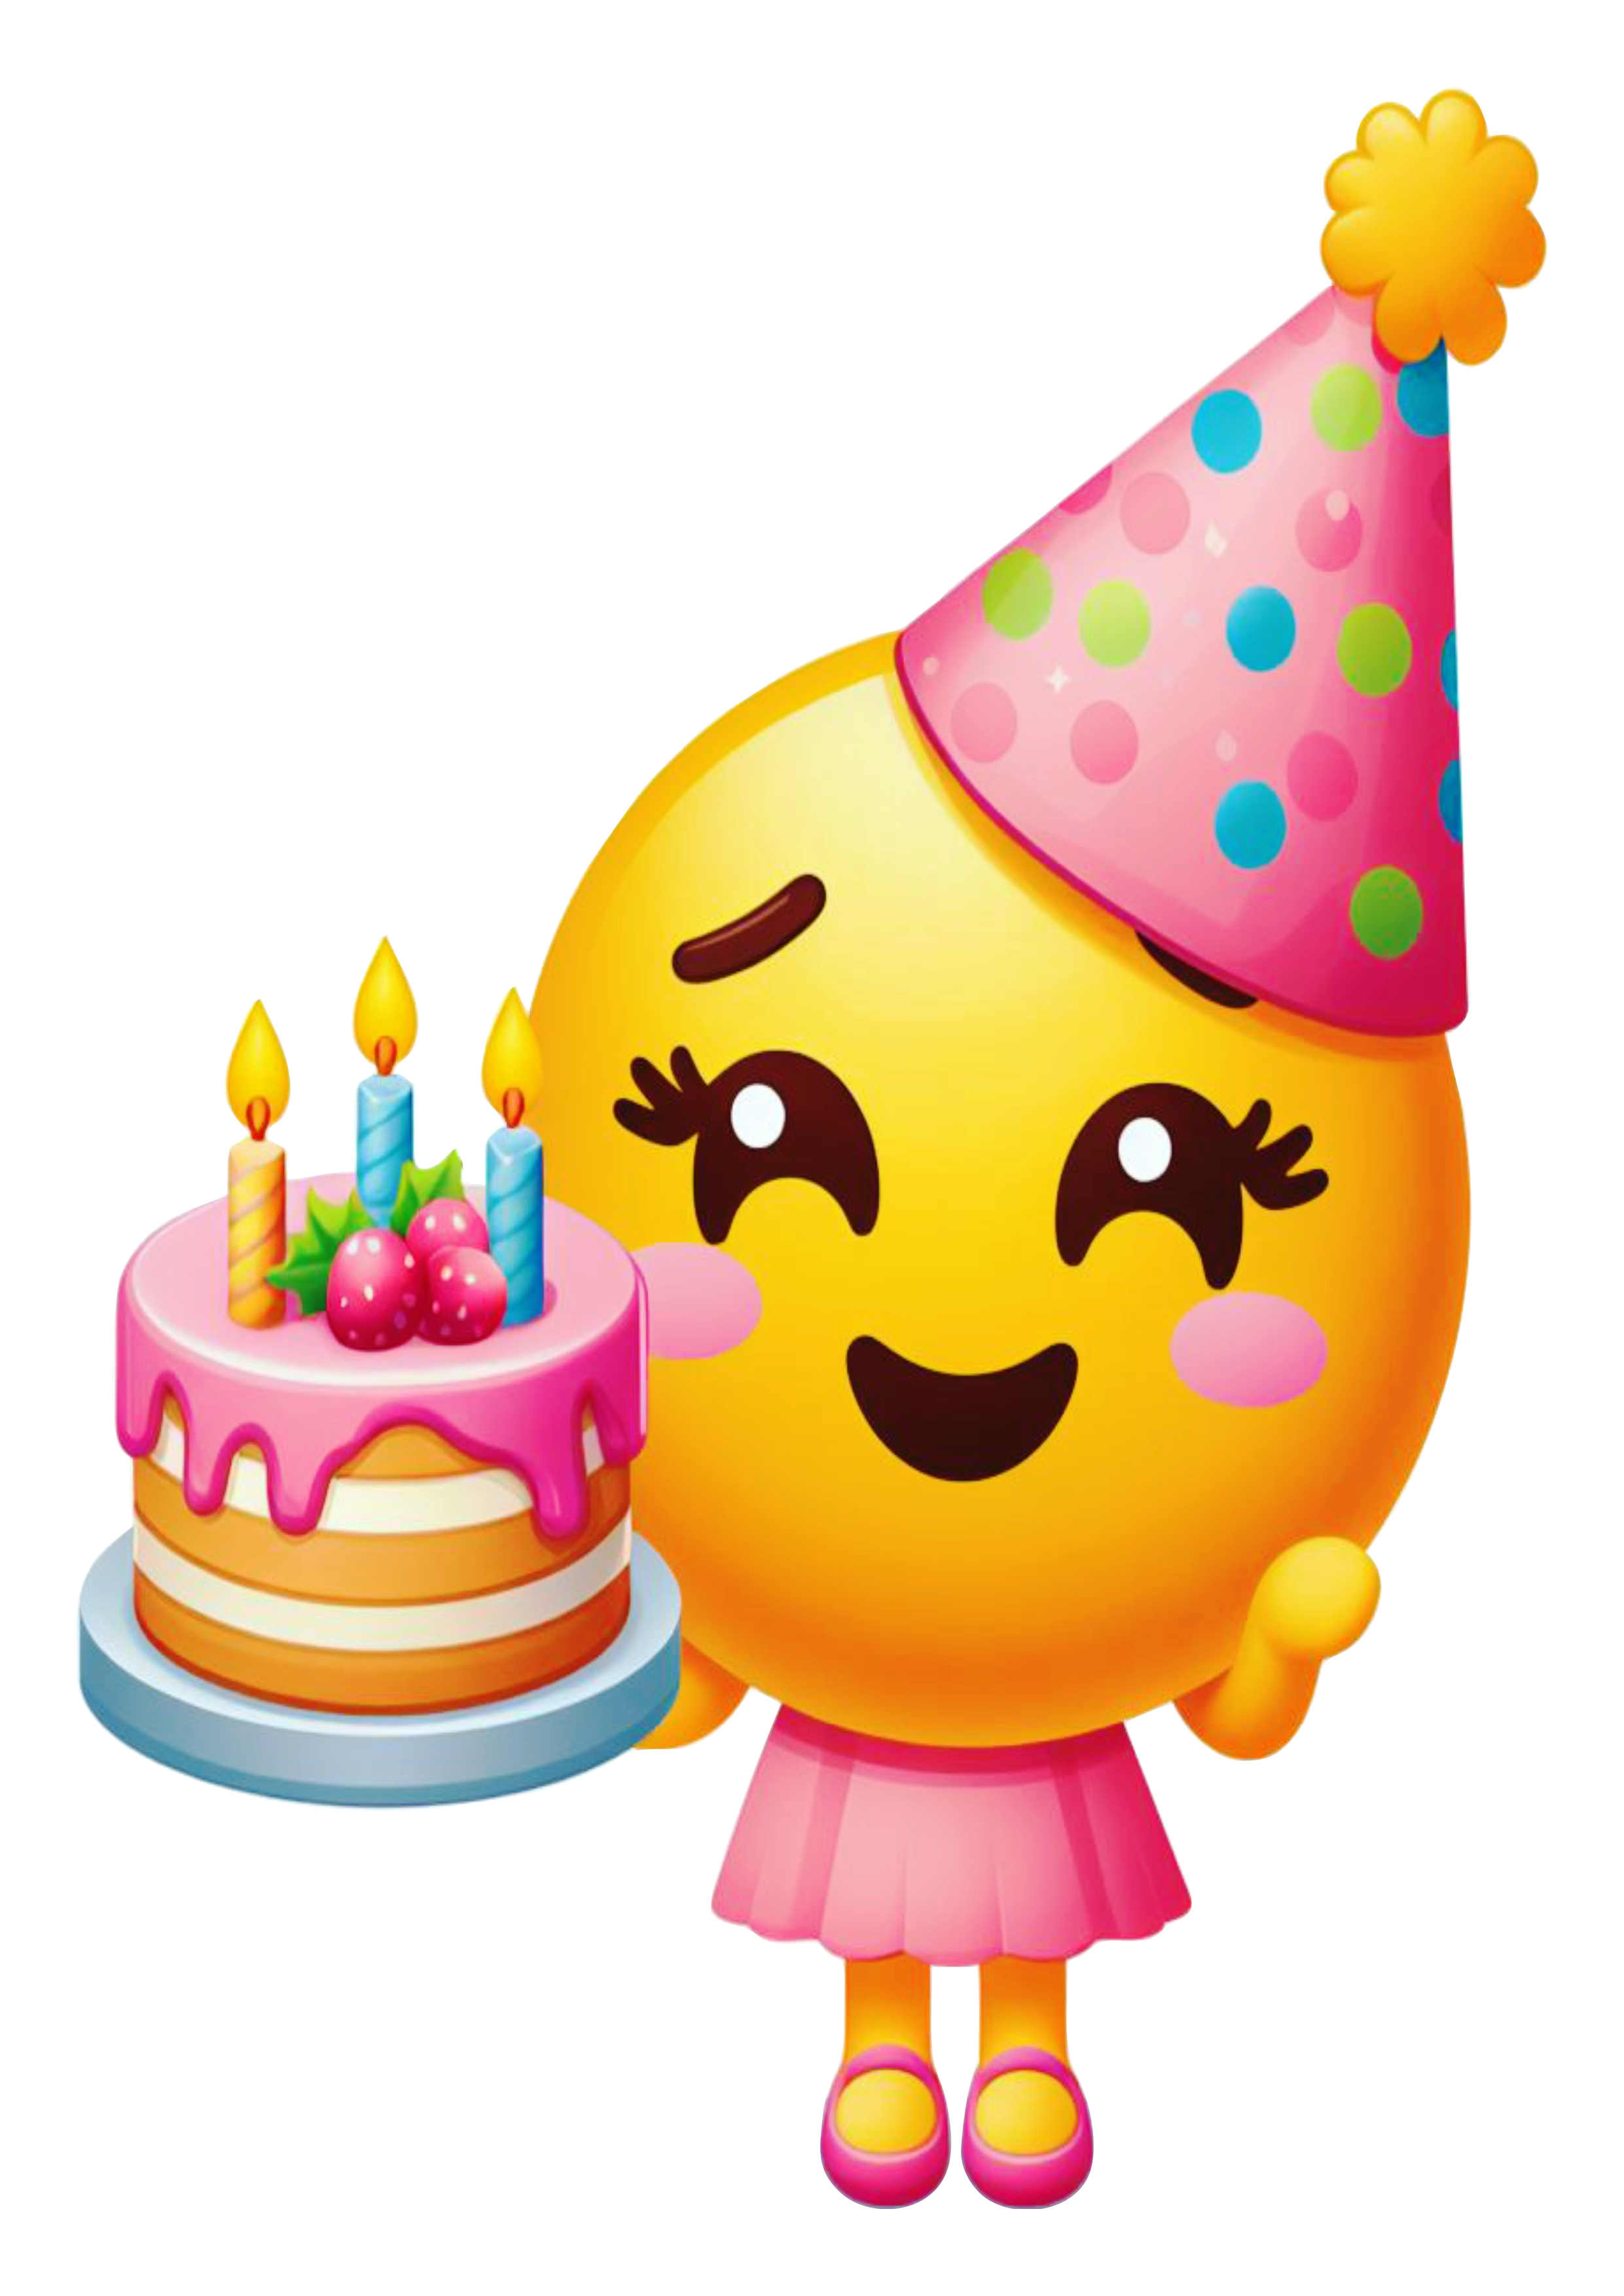 Birthday emoji png sticker for whatsapp party decoration girly cake party emoticon